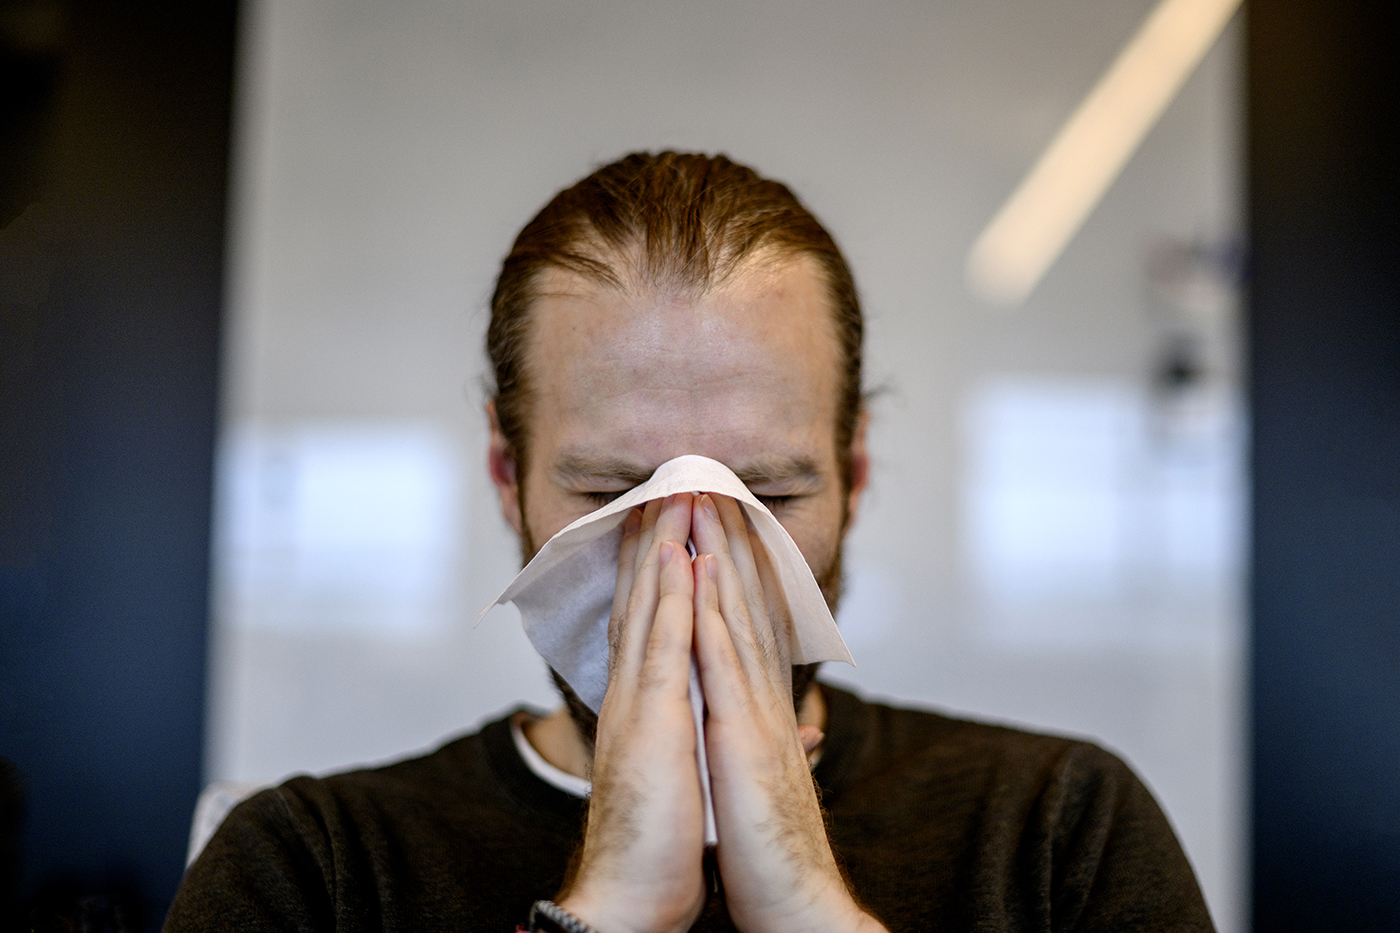 person blowing their nose due to seasonal allergies